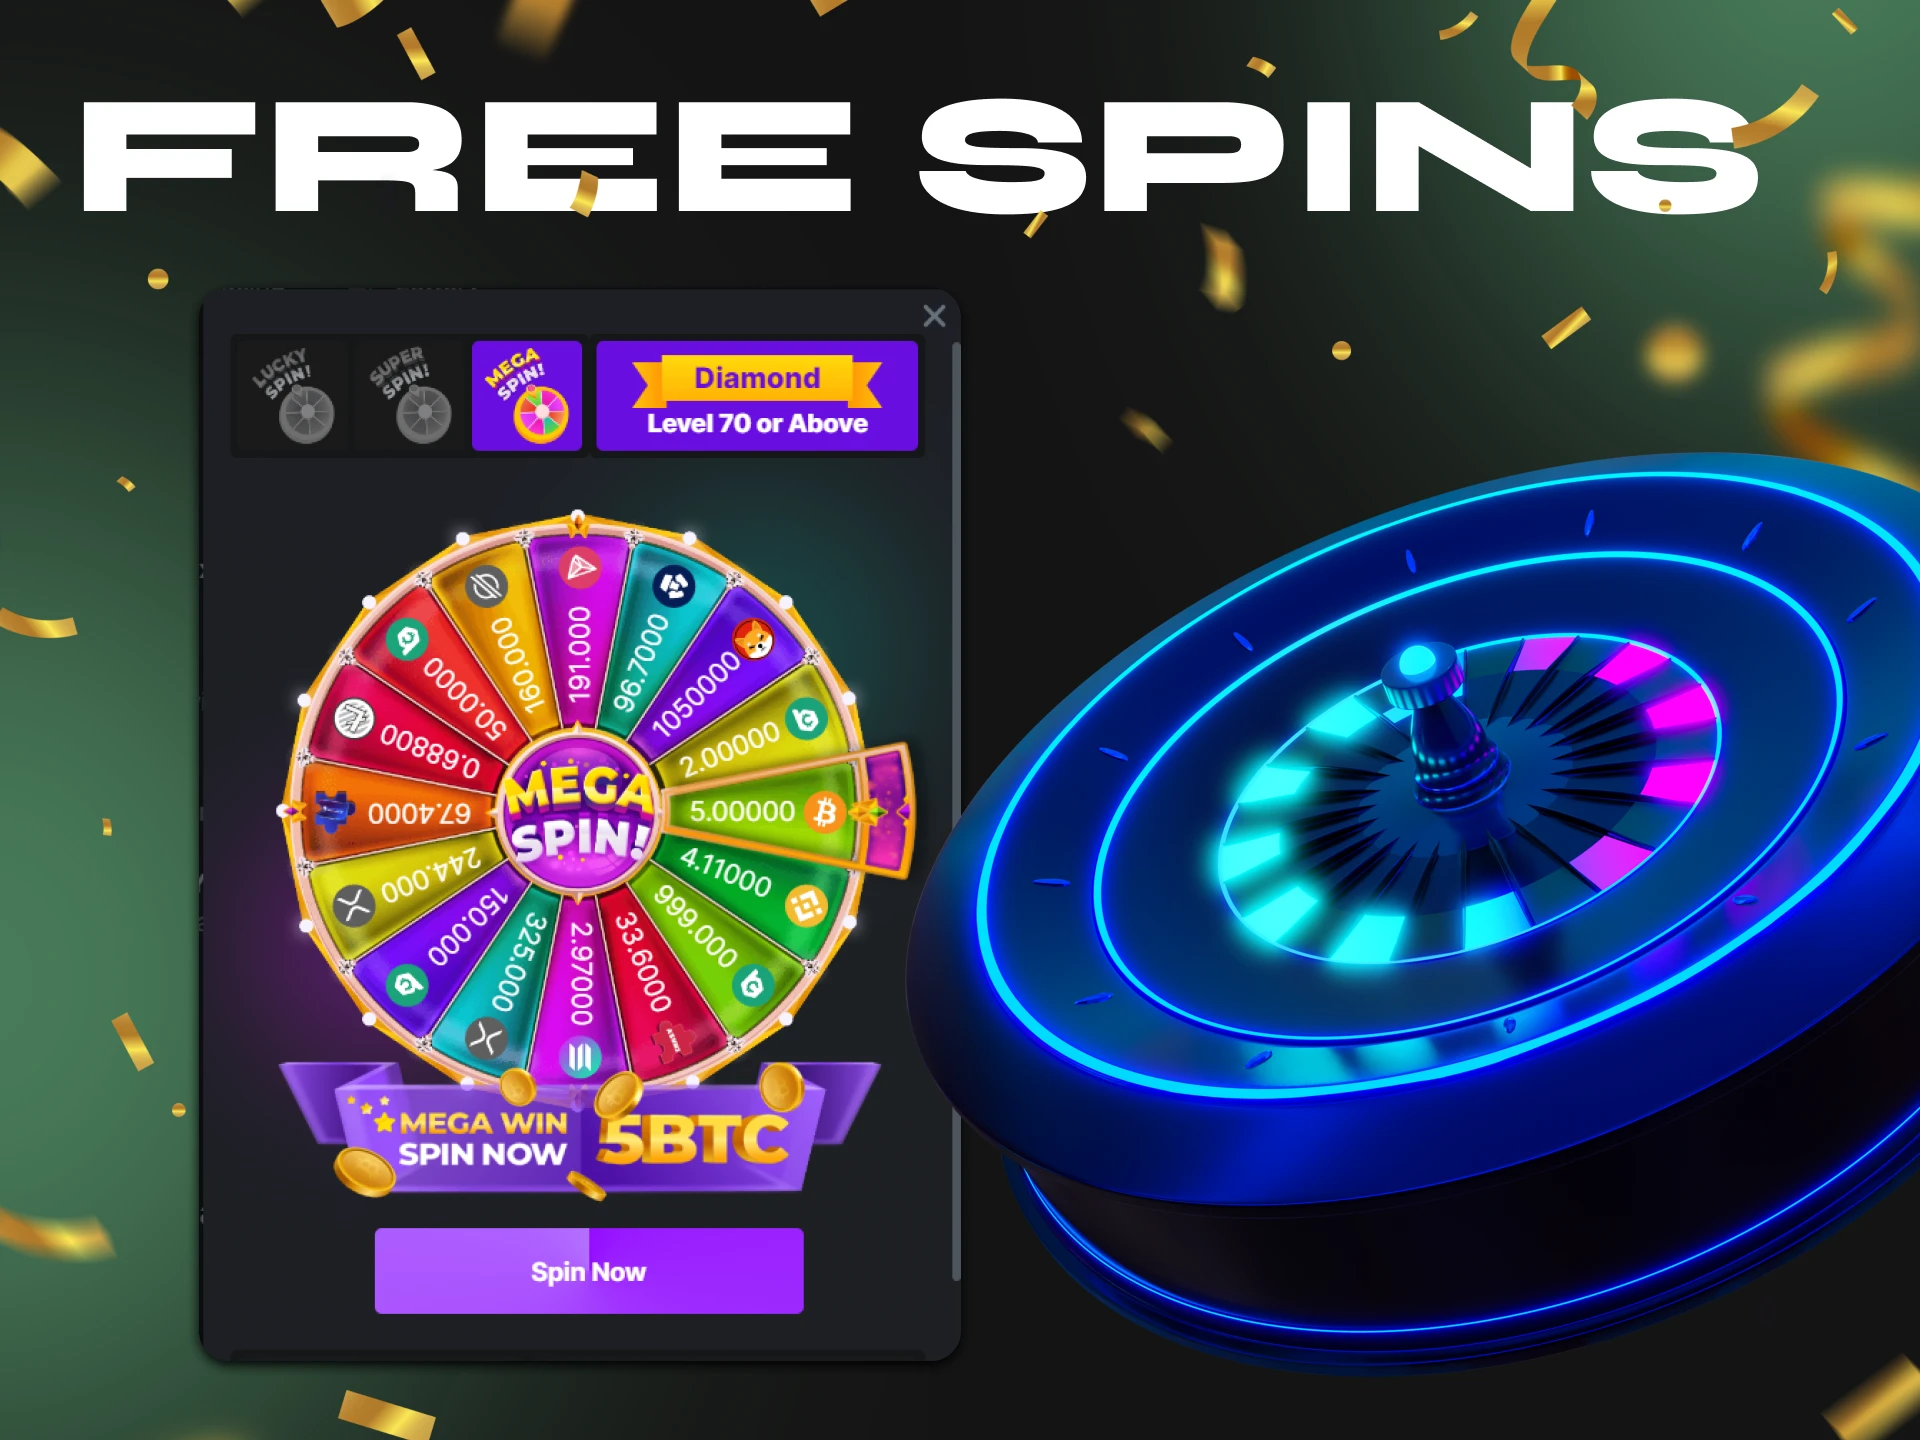 Spin the roulette and get winnings at crypto casino.